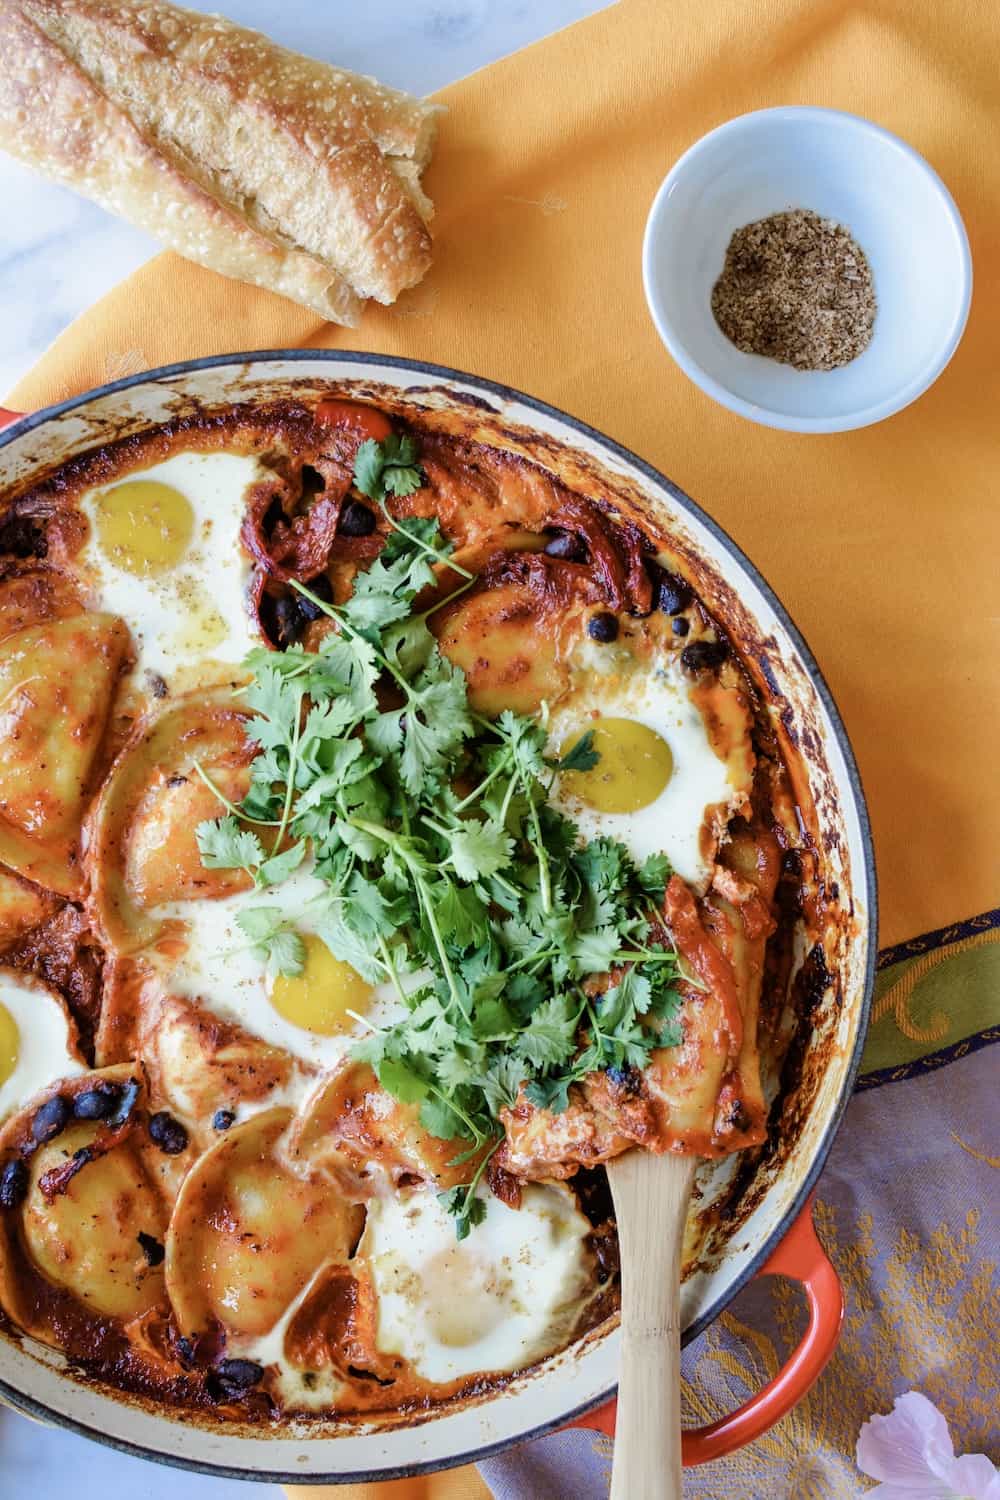 How to make baked eggs with Mrs. T's Pierogies, black beans, roasted red peppers, and silky baked eggs all in a guajillo-charred tomato ranchero sauce. #ad #MrsTPierogies #holajalapeno #bakedeggs #Mexicanbreakfast #rancherosauce